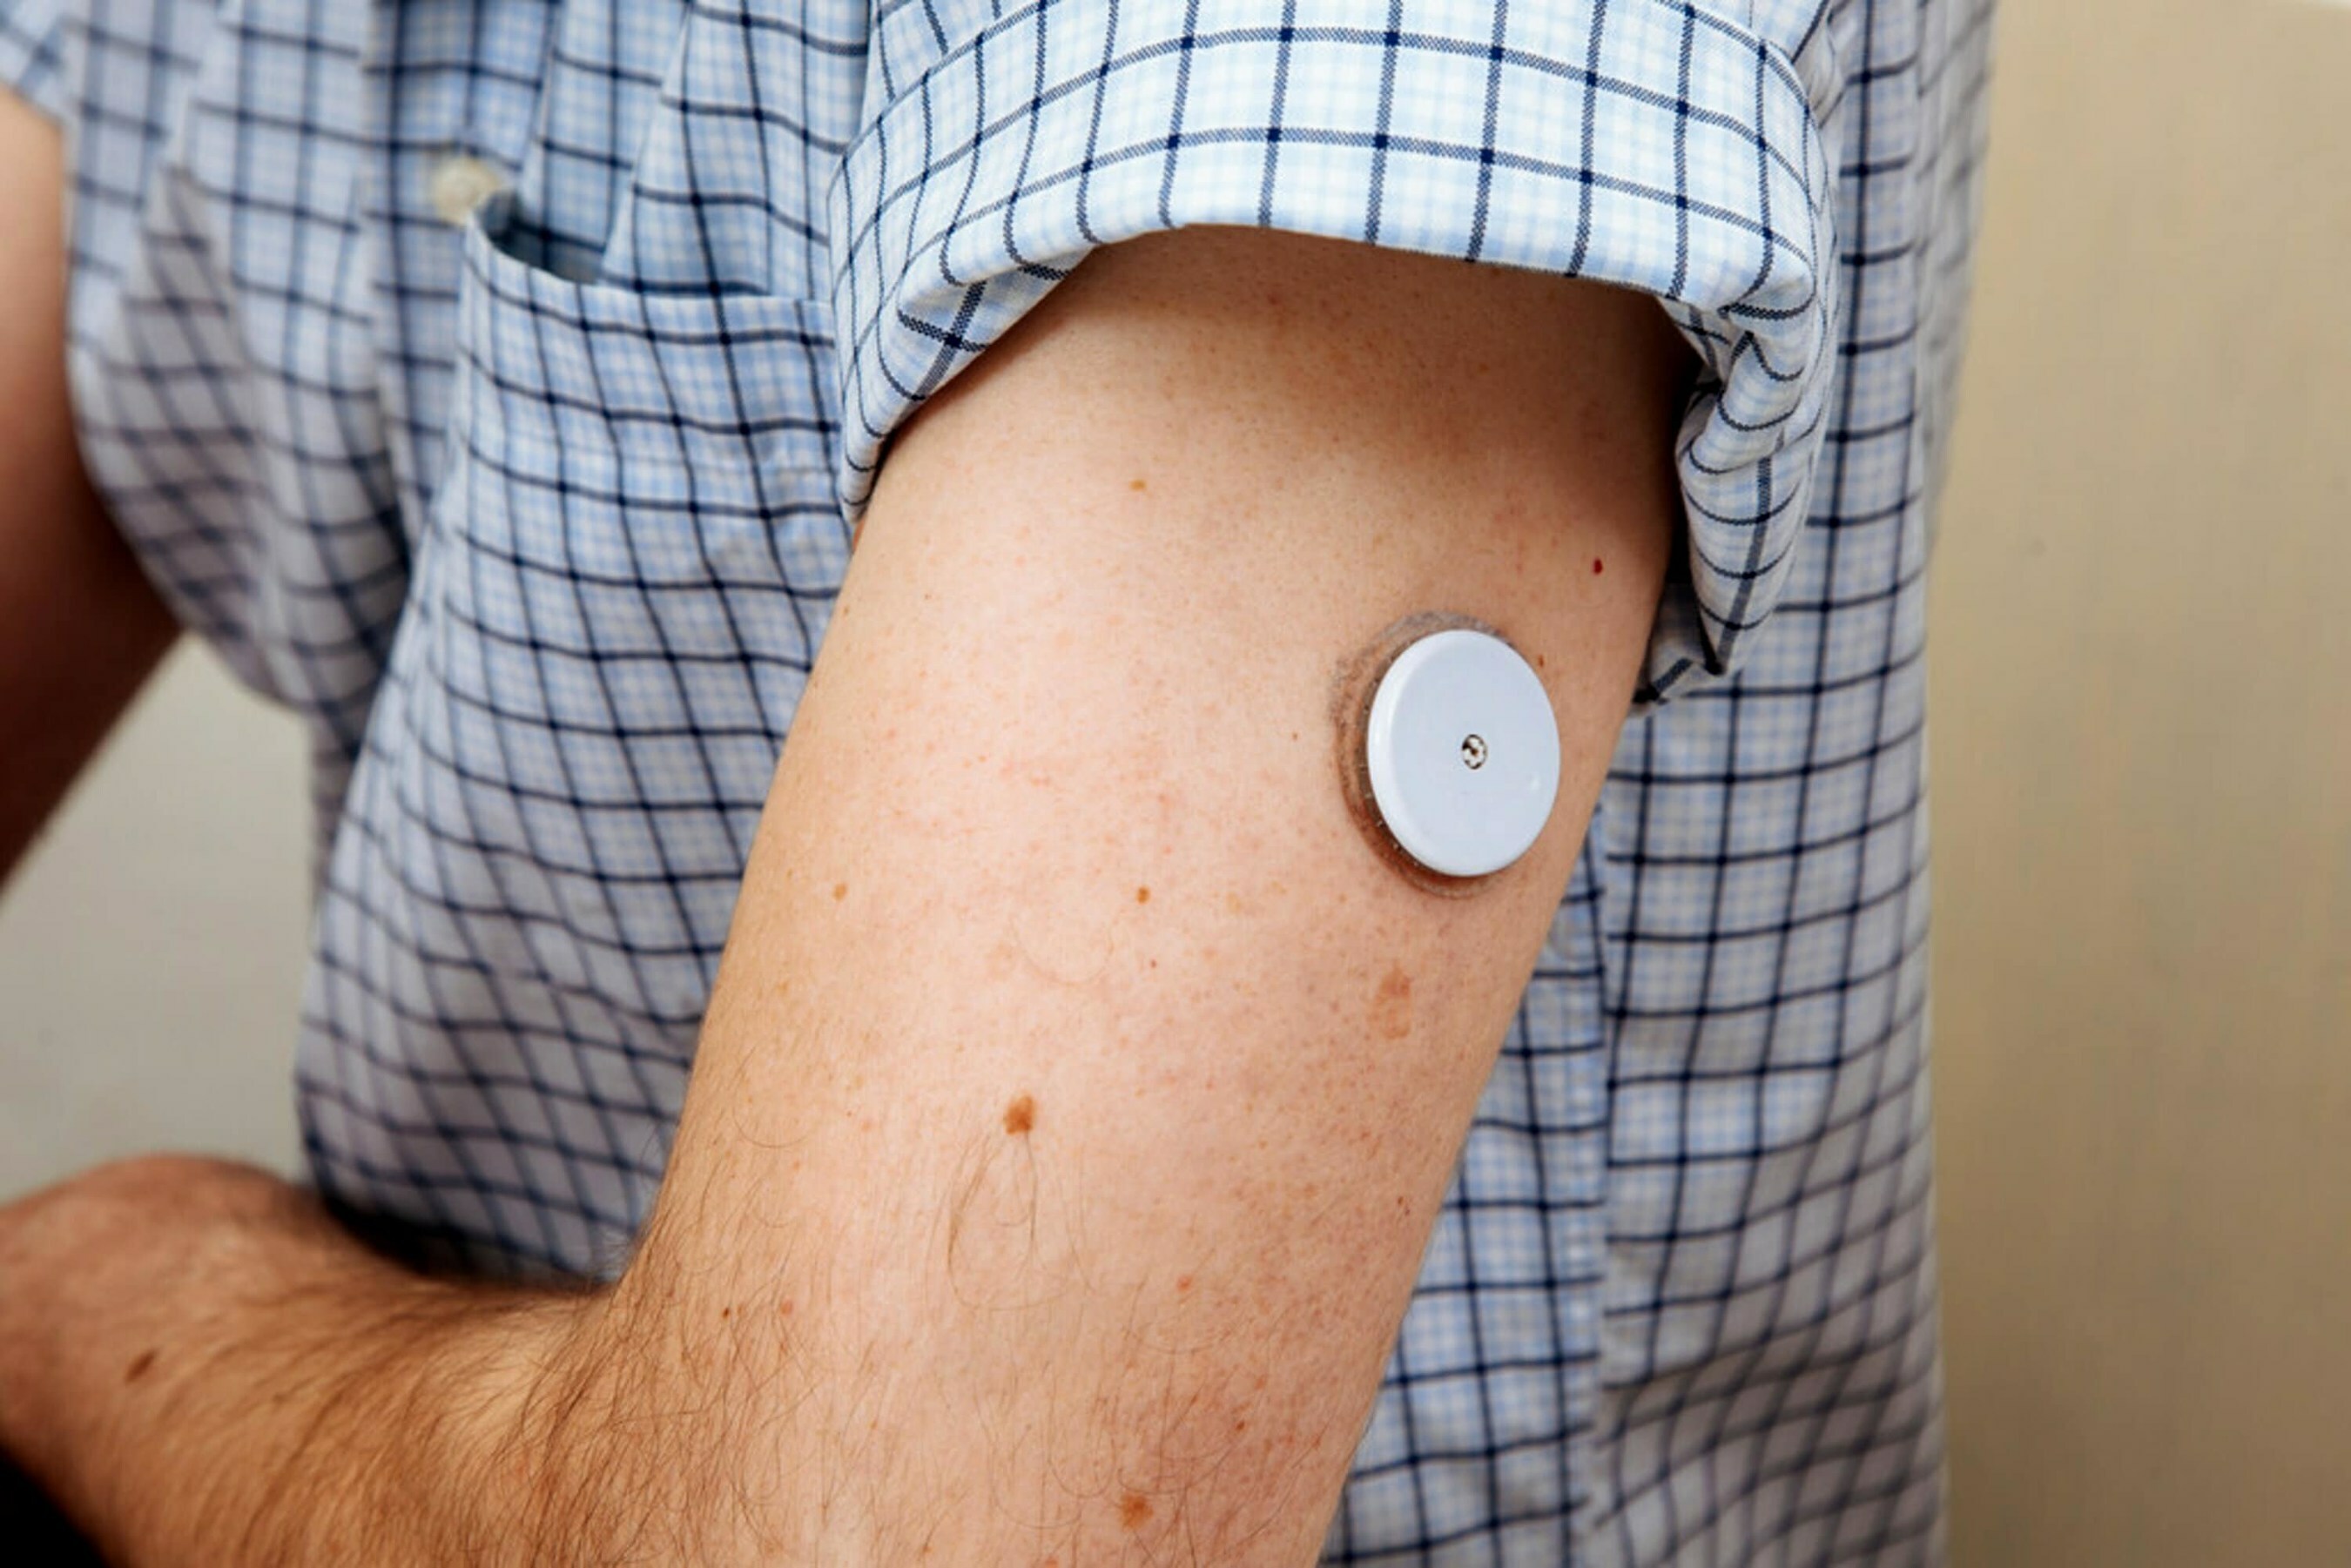 An arm with a rolled-up sleeve showcasing a small circular wearable medical device.